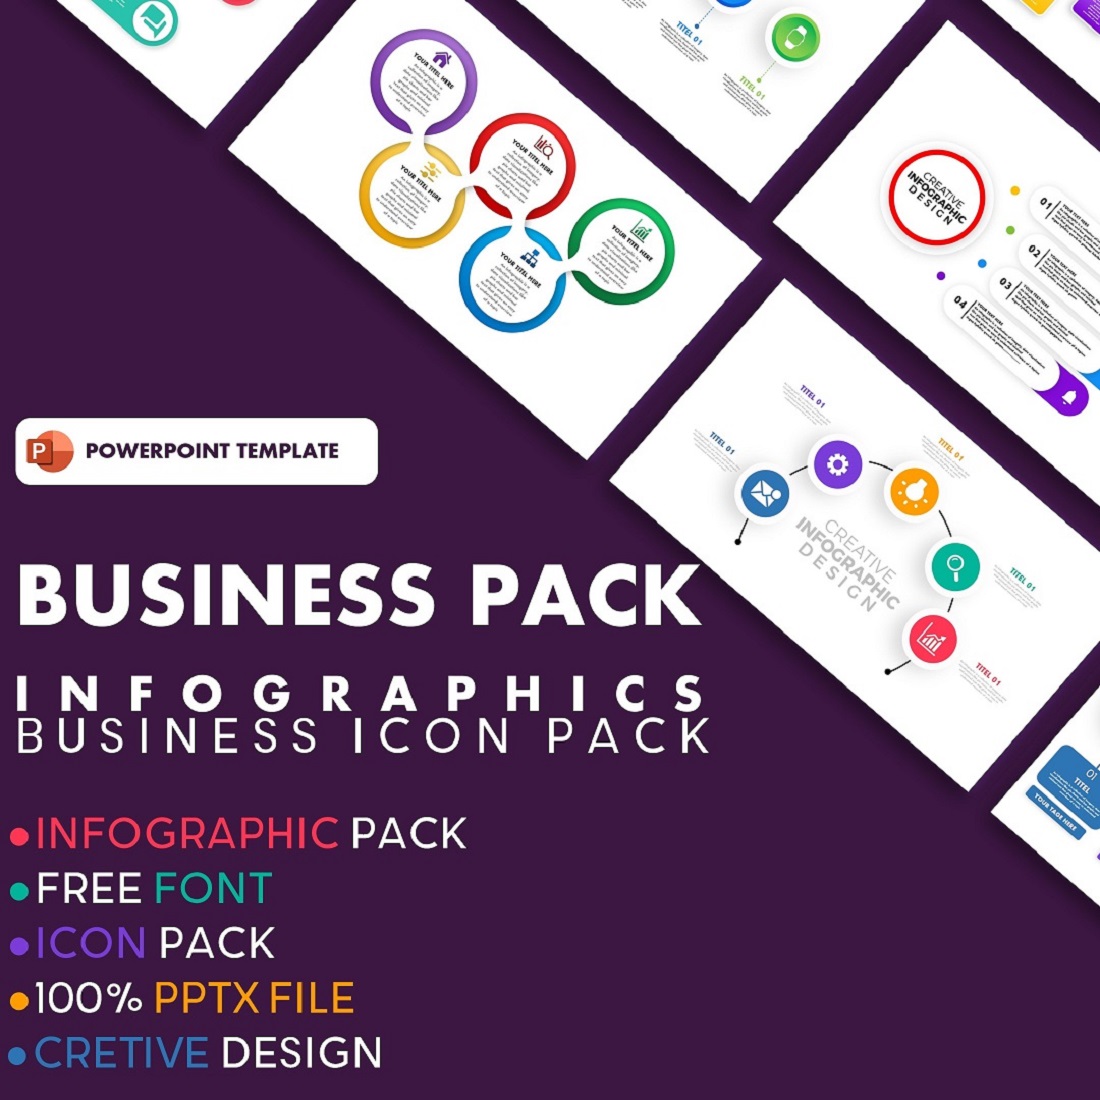 Business infographic pack PowerPoint templates preview image.